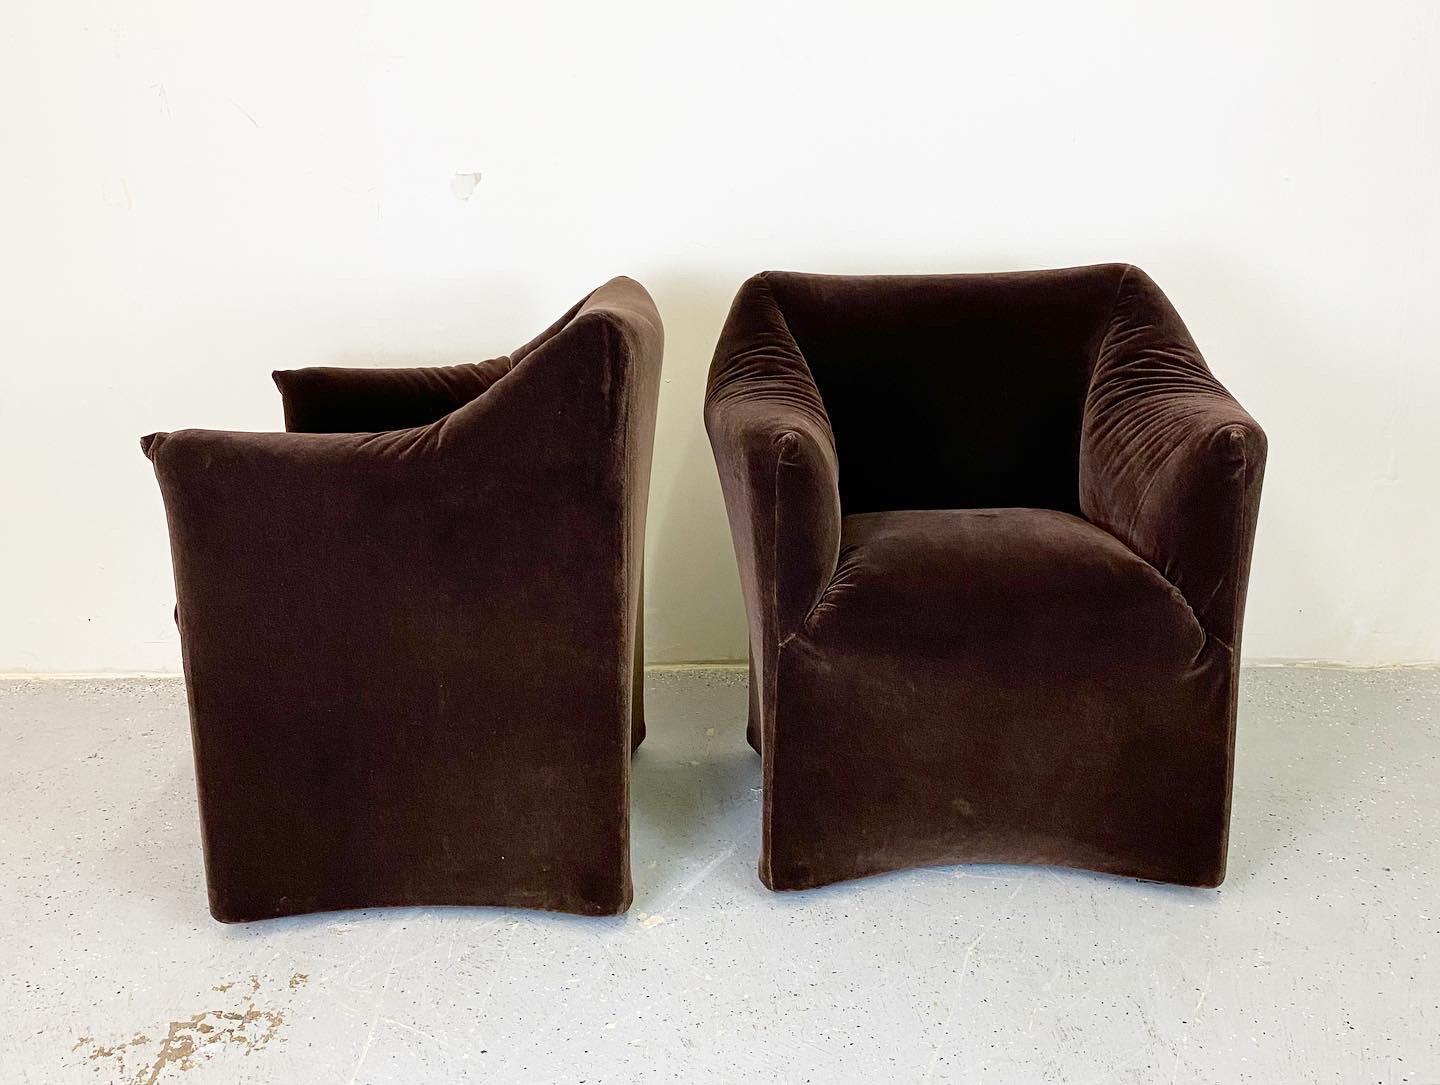 An expertly restored pair of Tentazione chairs by Mario Bellini for Cassina. These have been beautifully upholstered in a plush mohair. These are extremely comfortable and elegant.